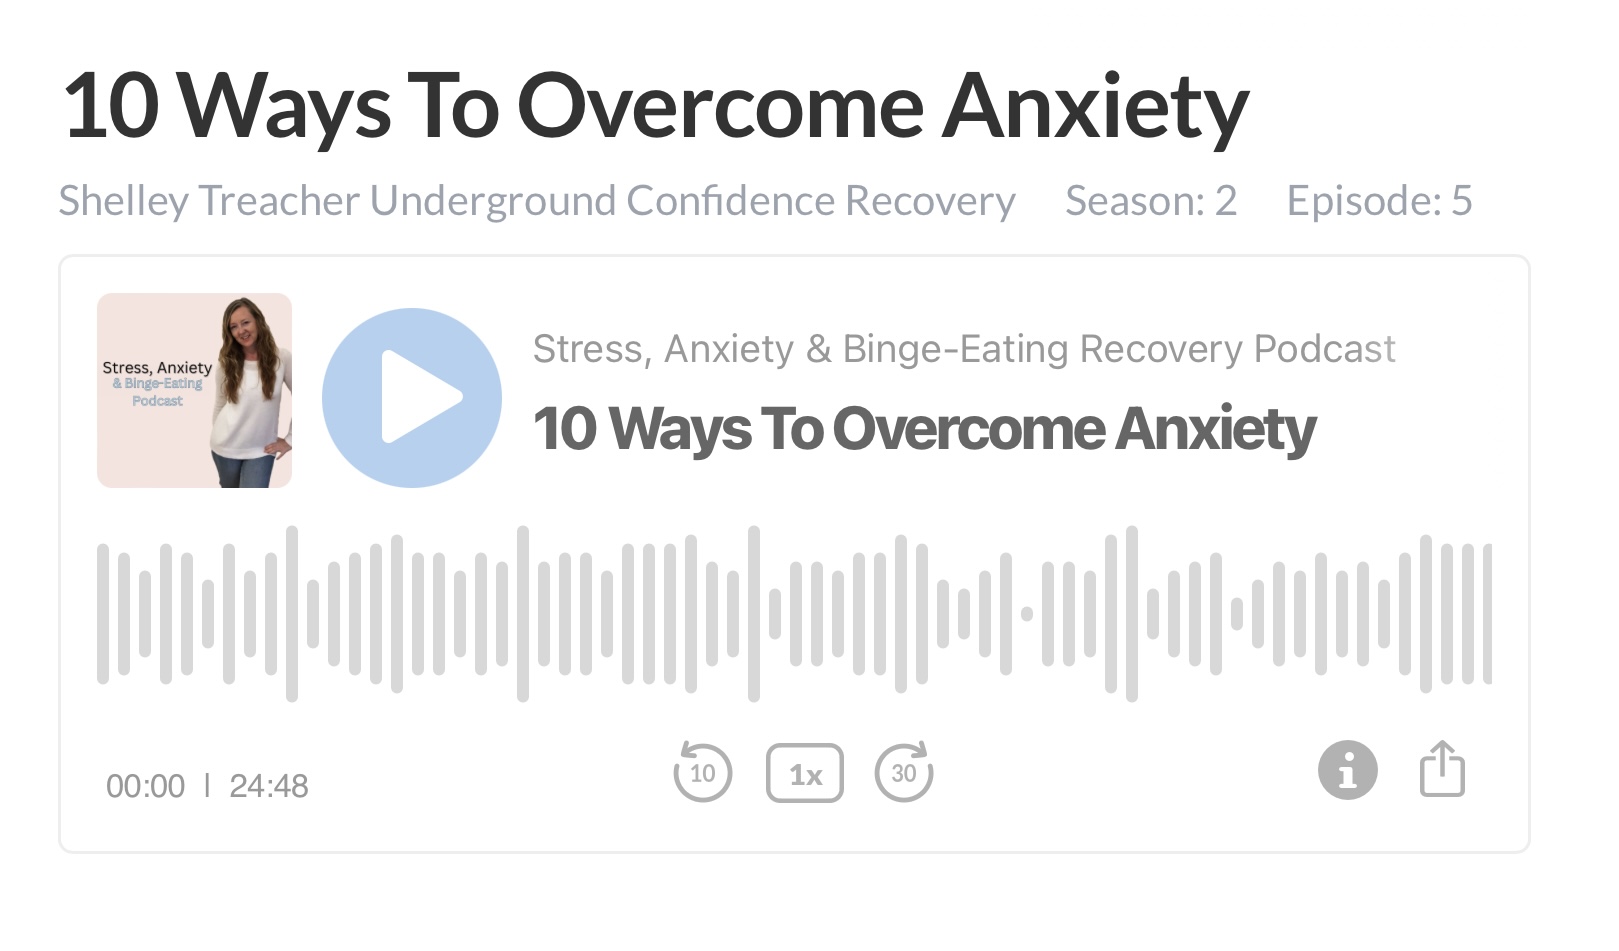 10 ways to overcome anxiety